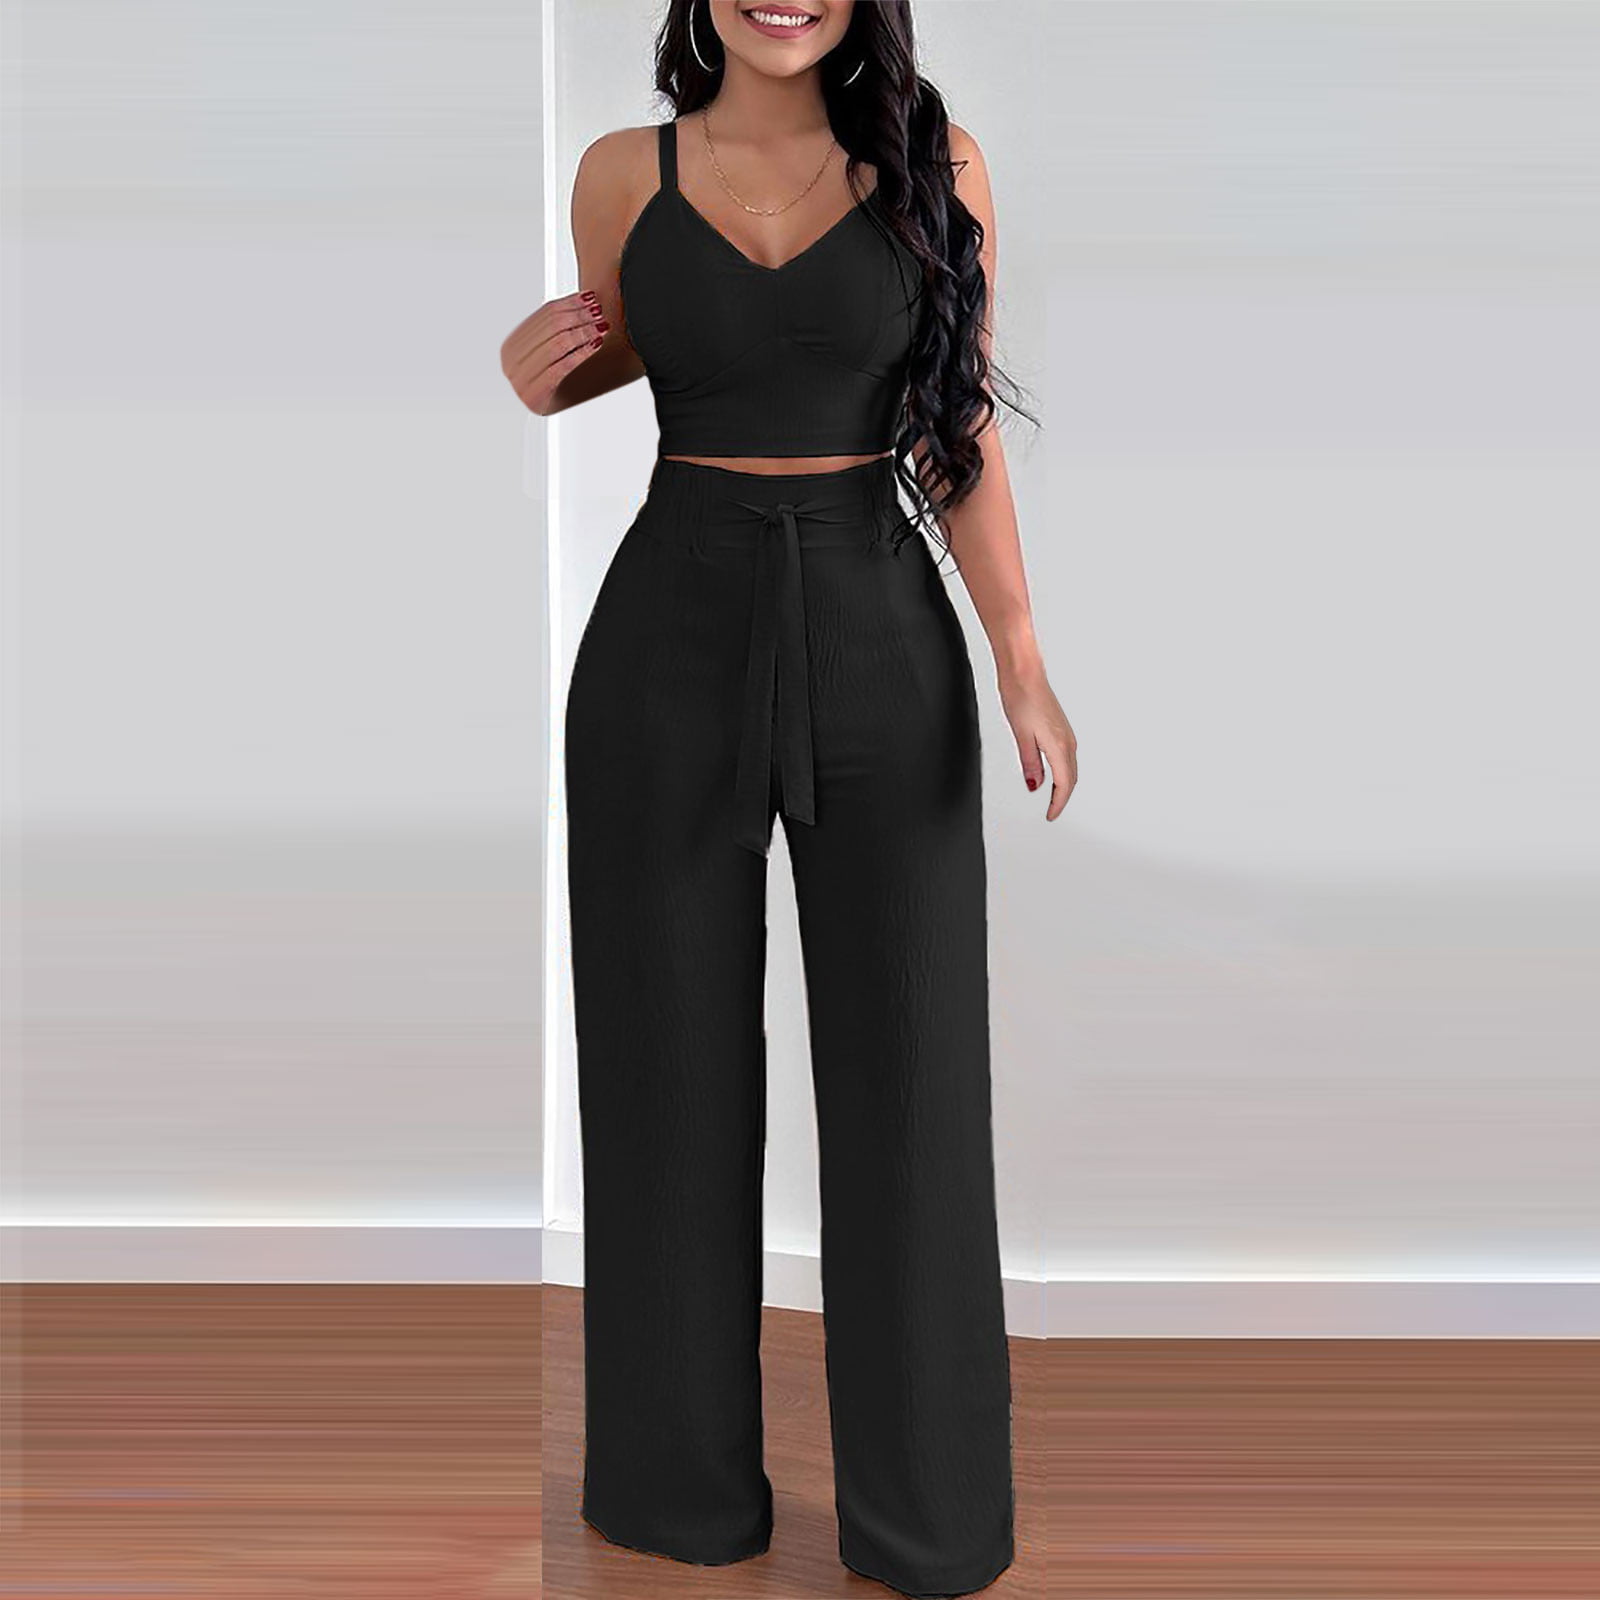 REORIAFEE Going out Outfits for Women Going out Outfits Women Sexy Elastic  Outdoor Wrap Leggings Tops Pants Suit Black L 